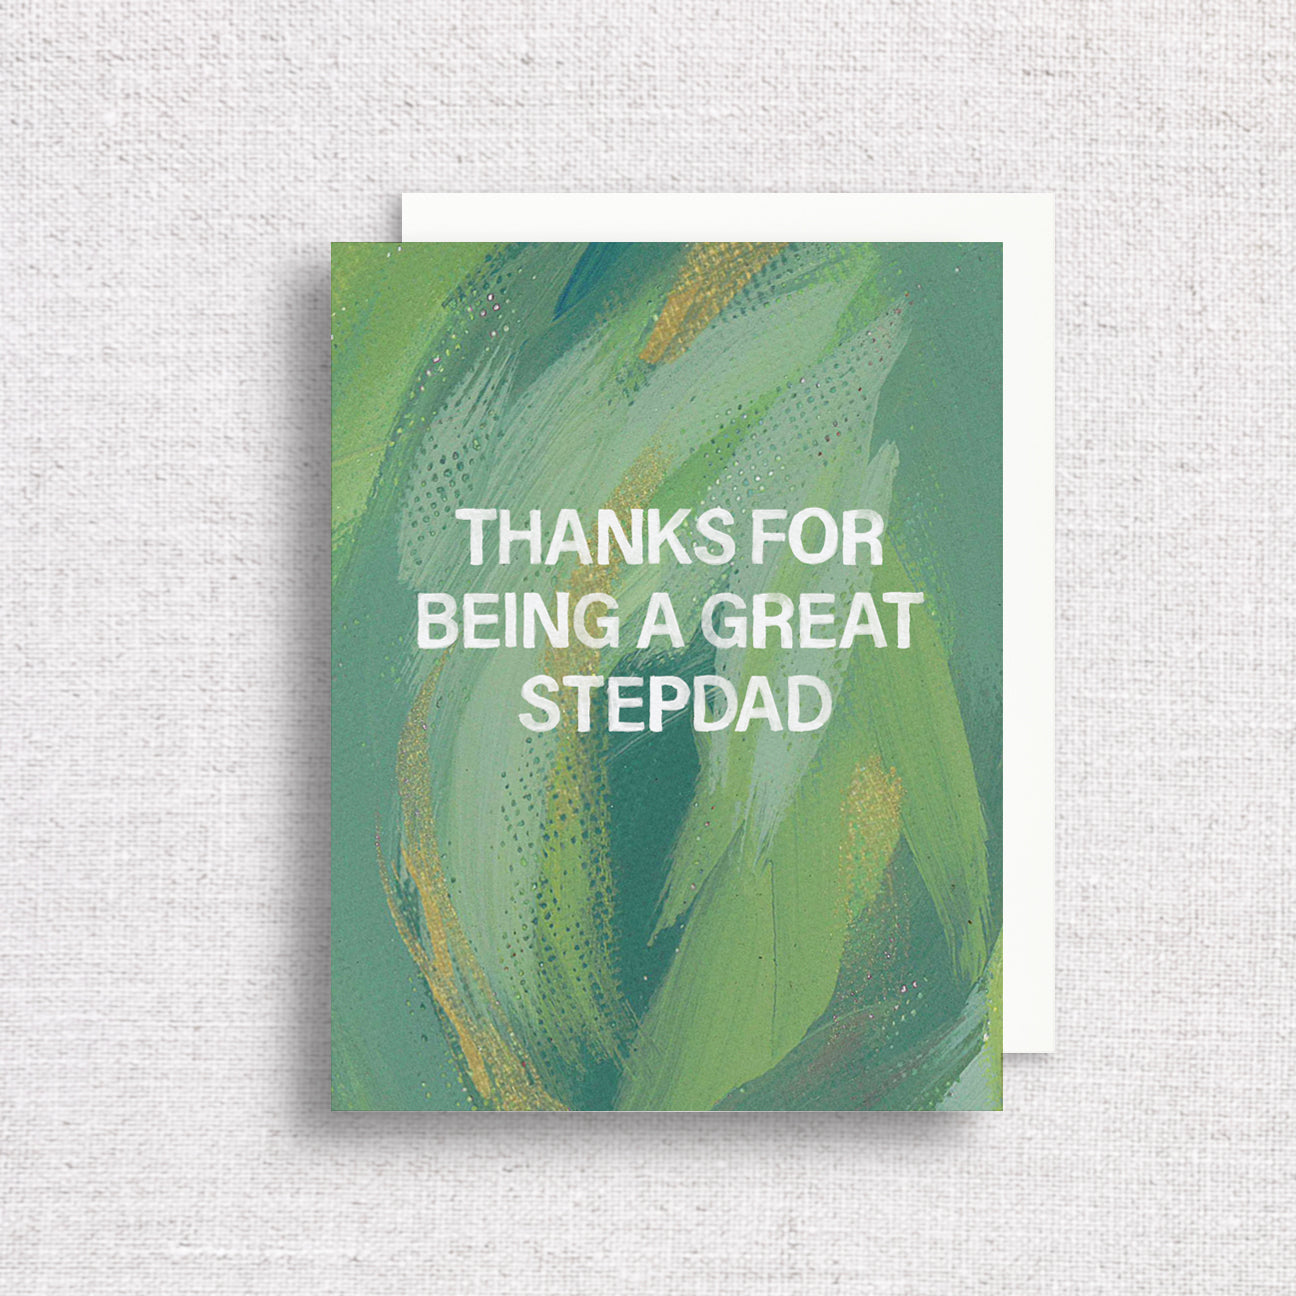 Thanks for Being a Great Stepdad Greeting Card by Gert & Co